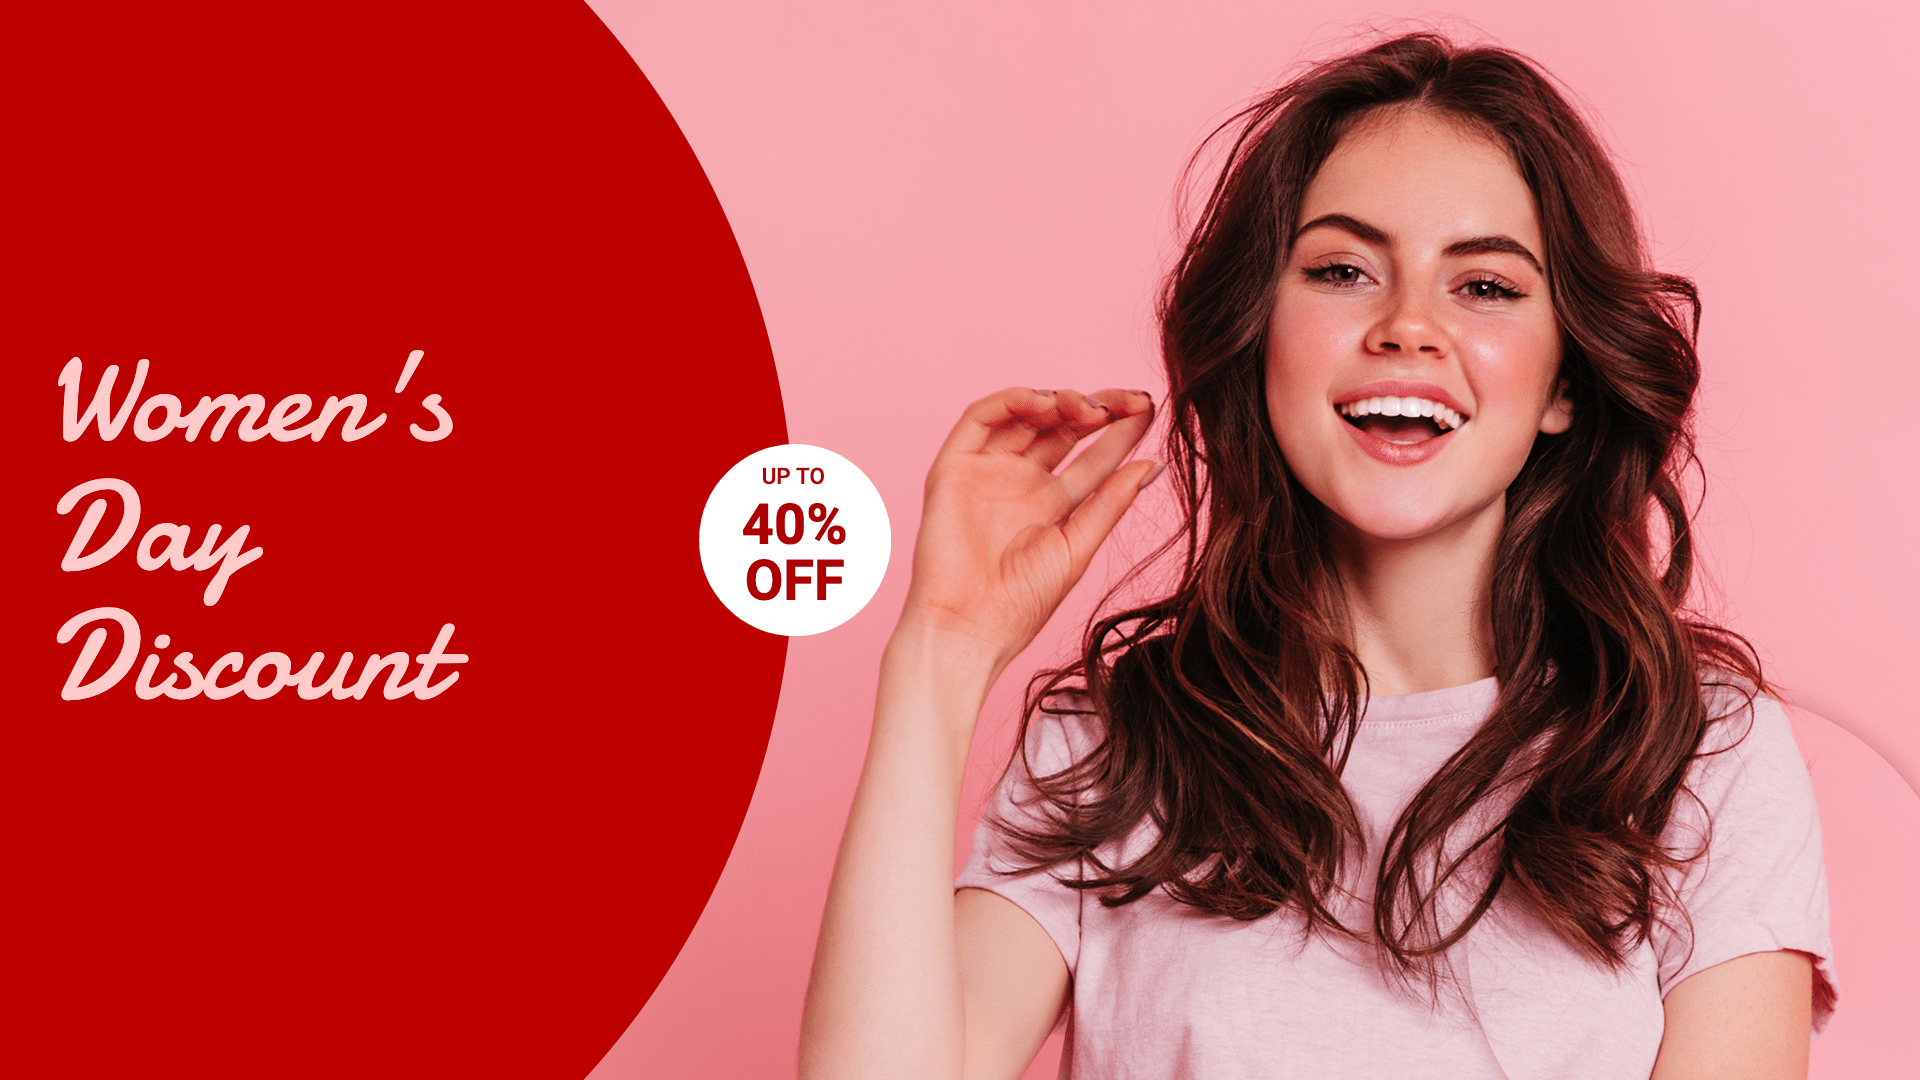 Simple Skin Care Women's Day Discount Ecommerce Banner